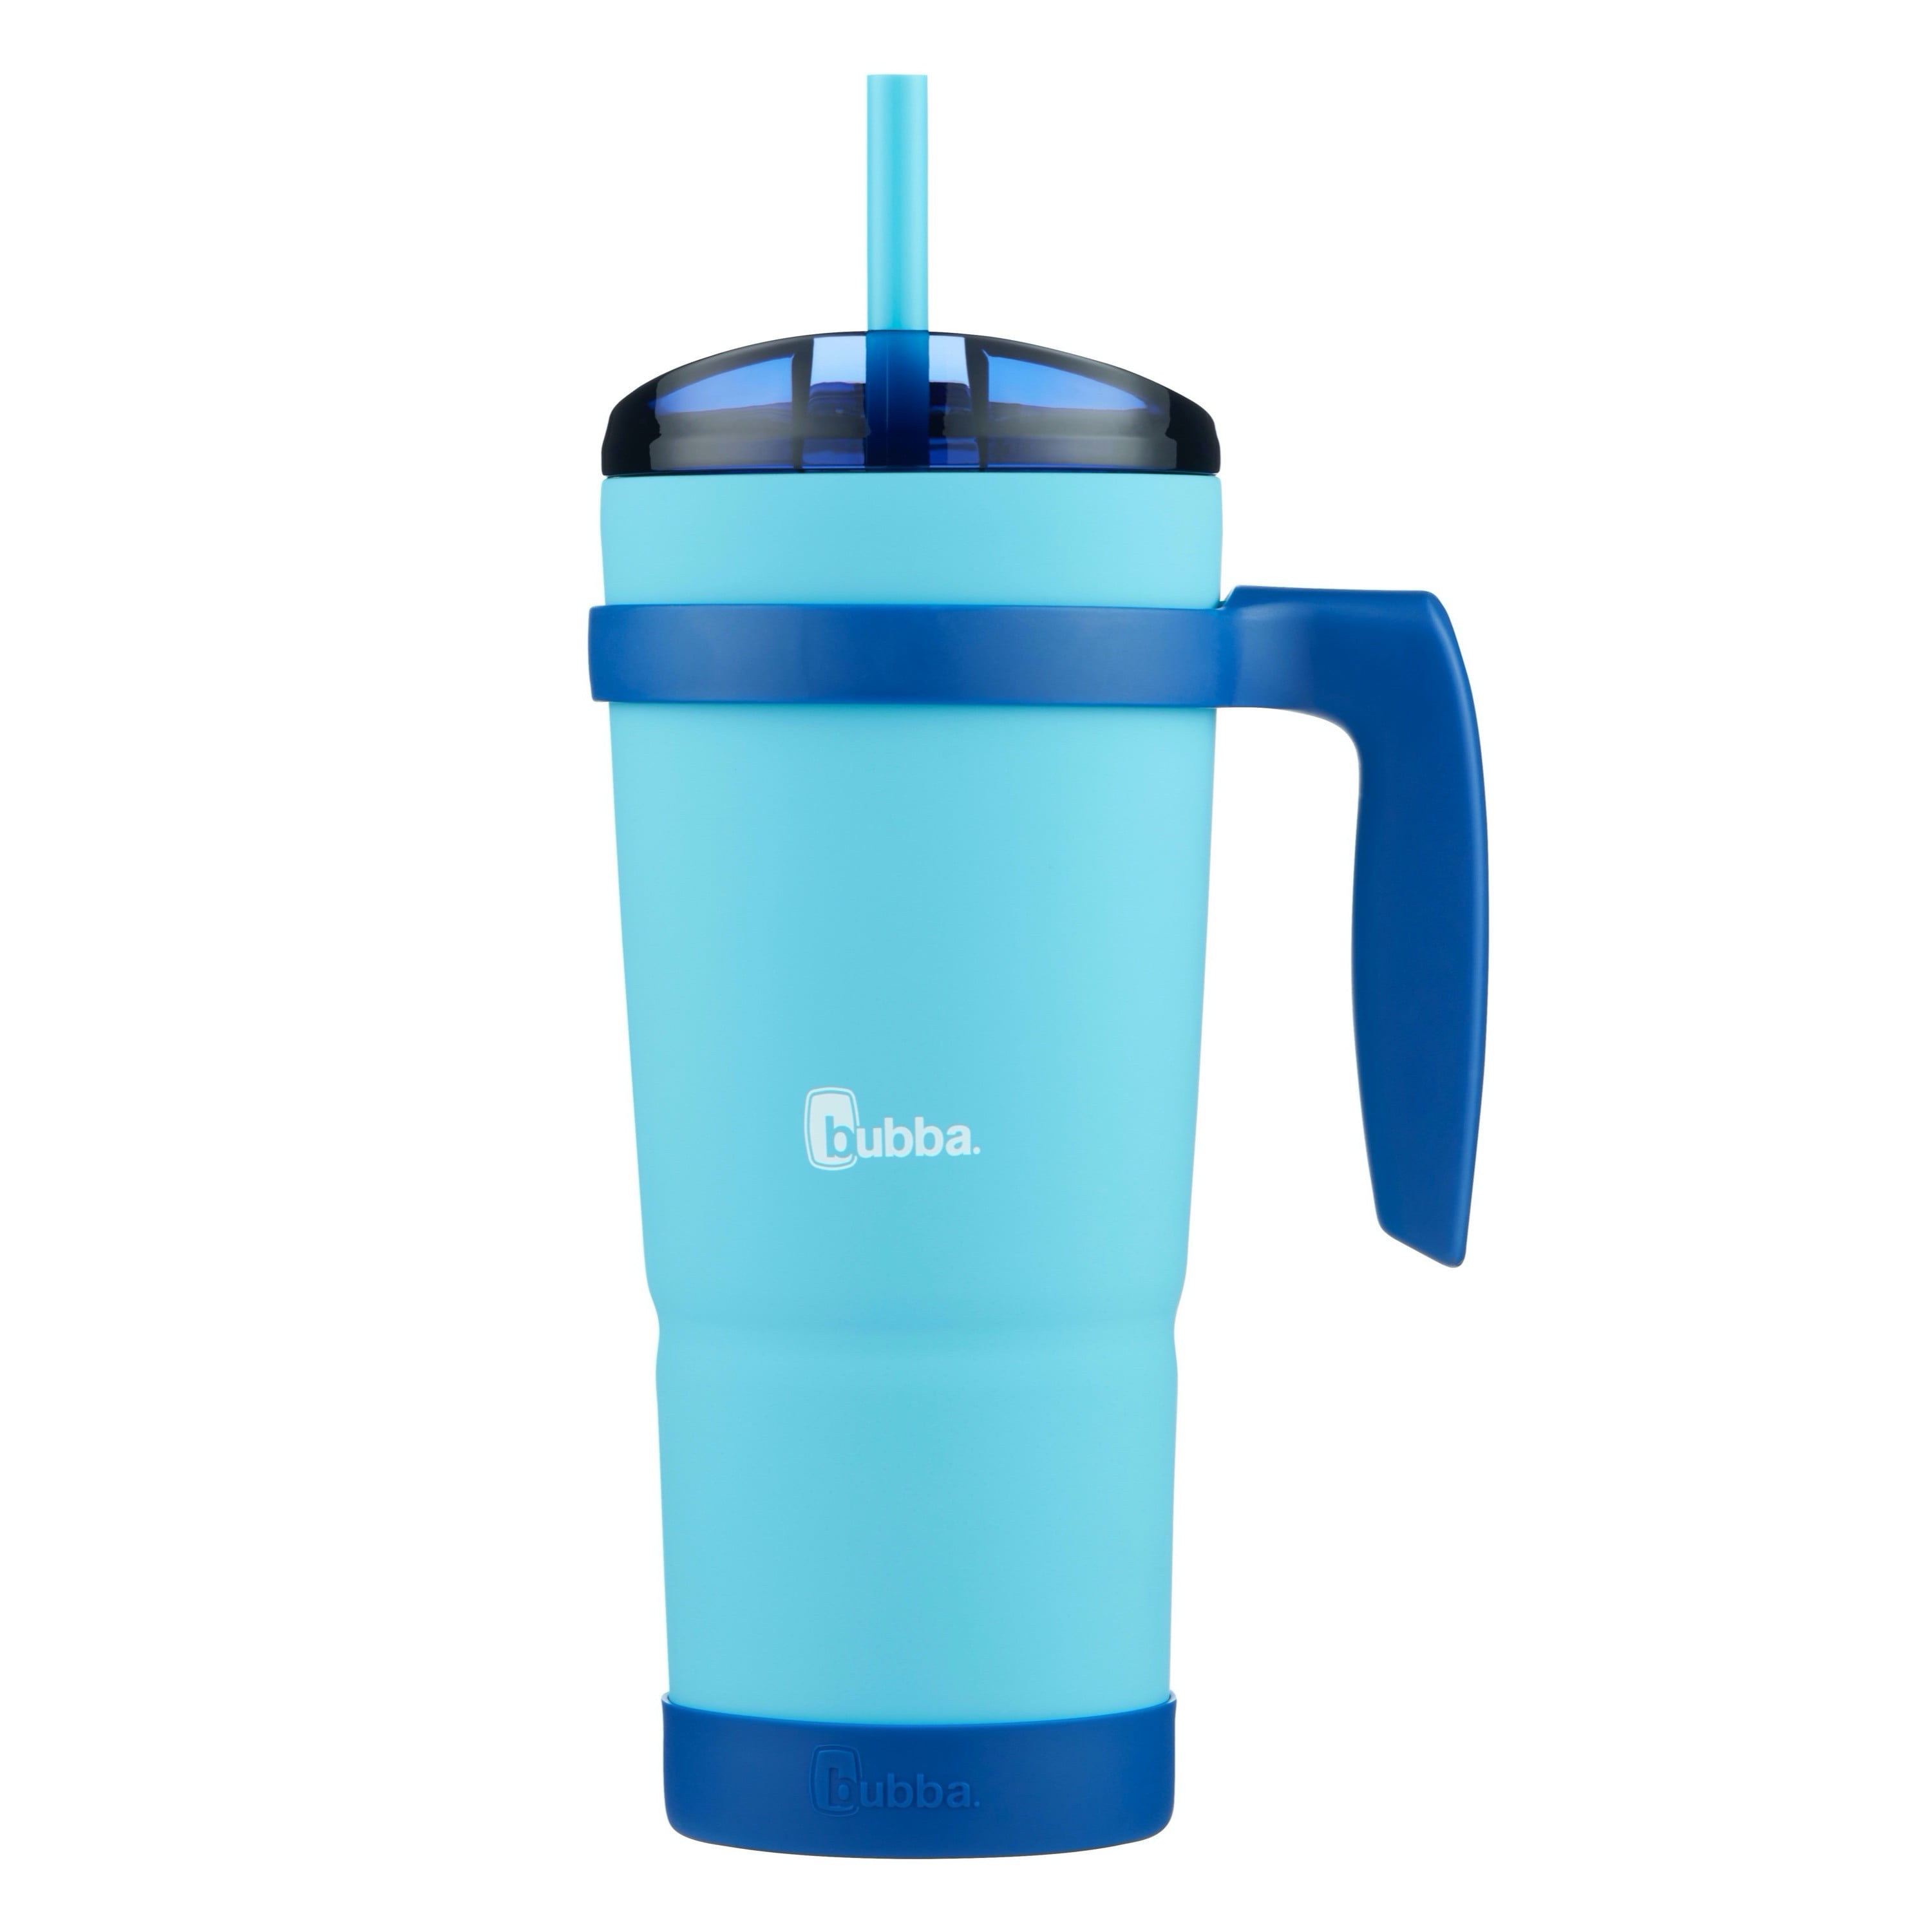 Bubba Envy S Insulated Tumbler with Bumper and Handle, 32 oz